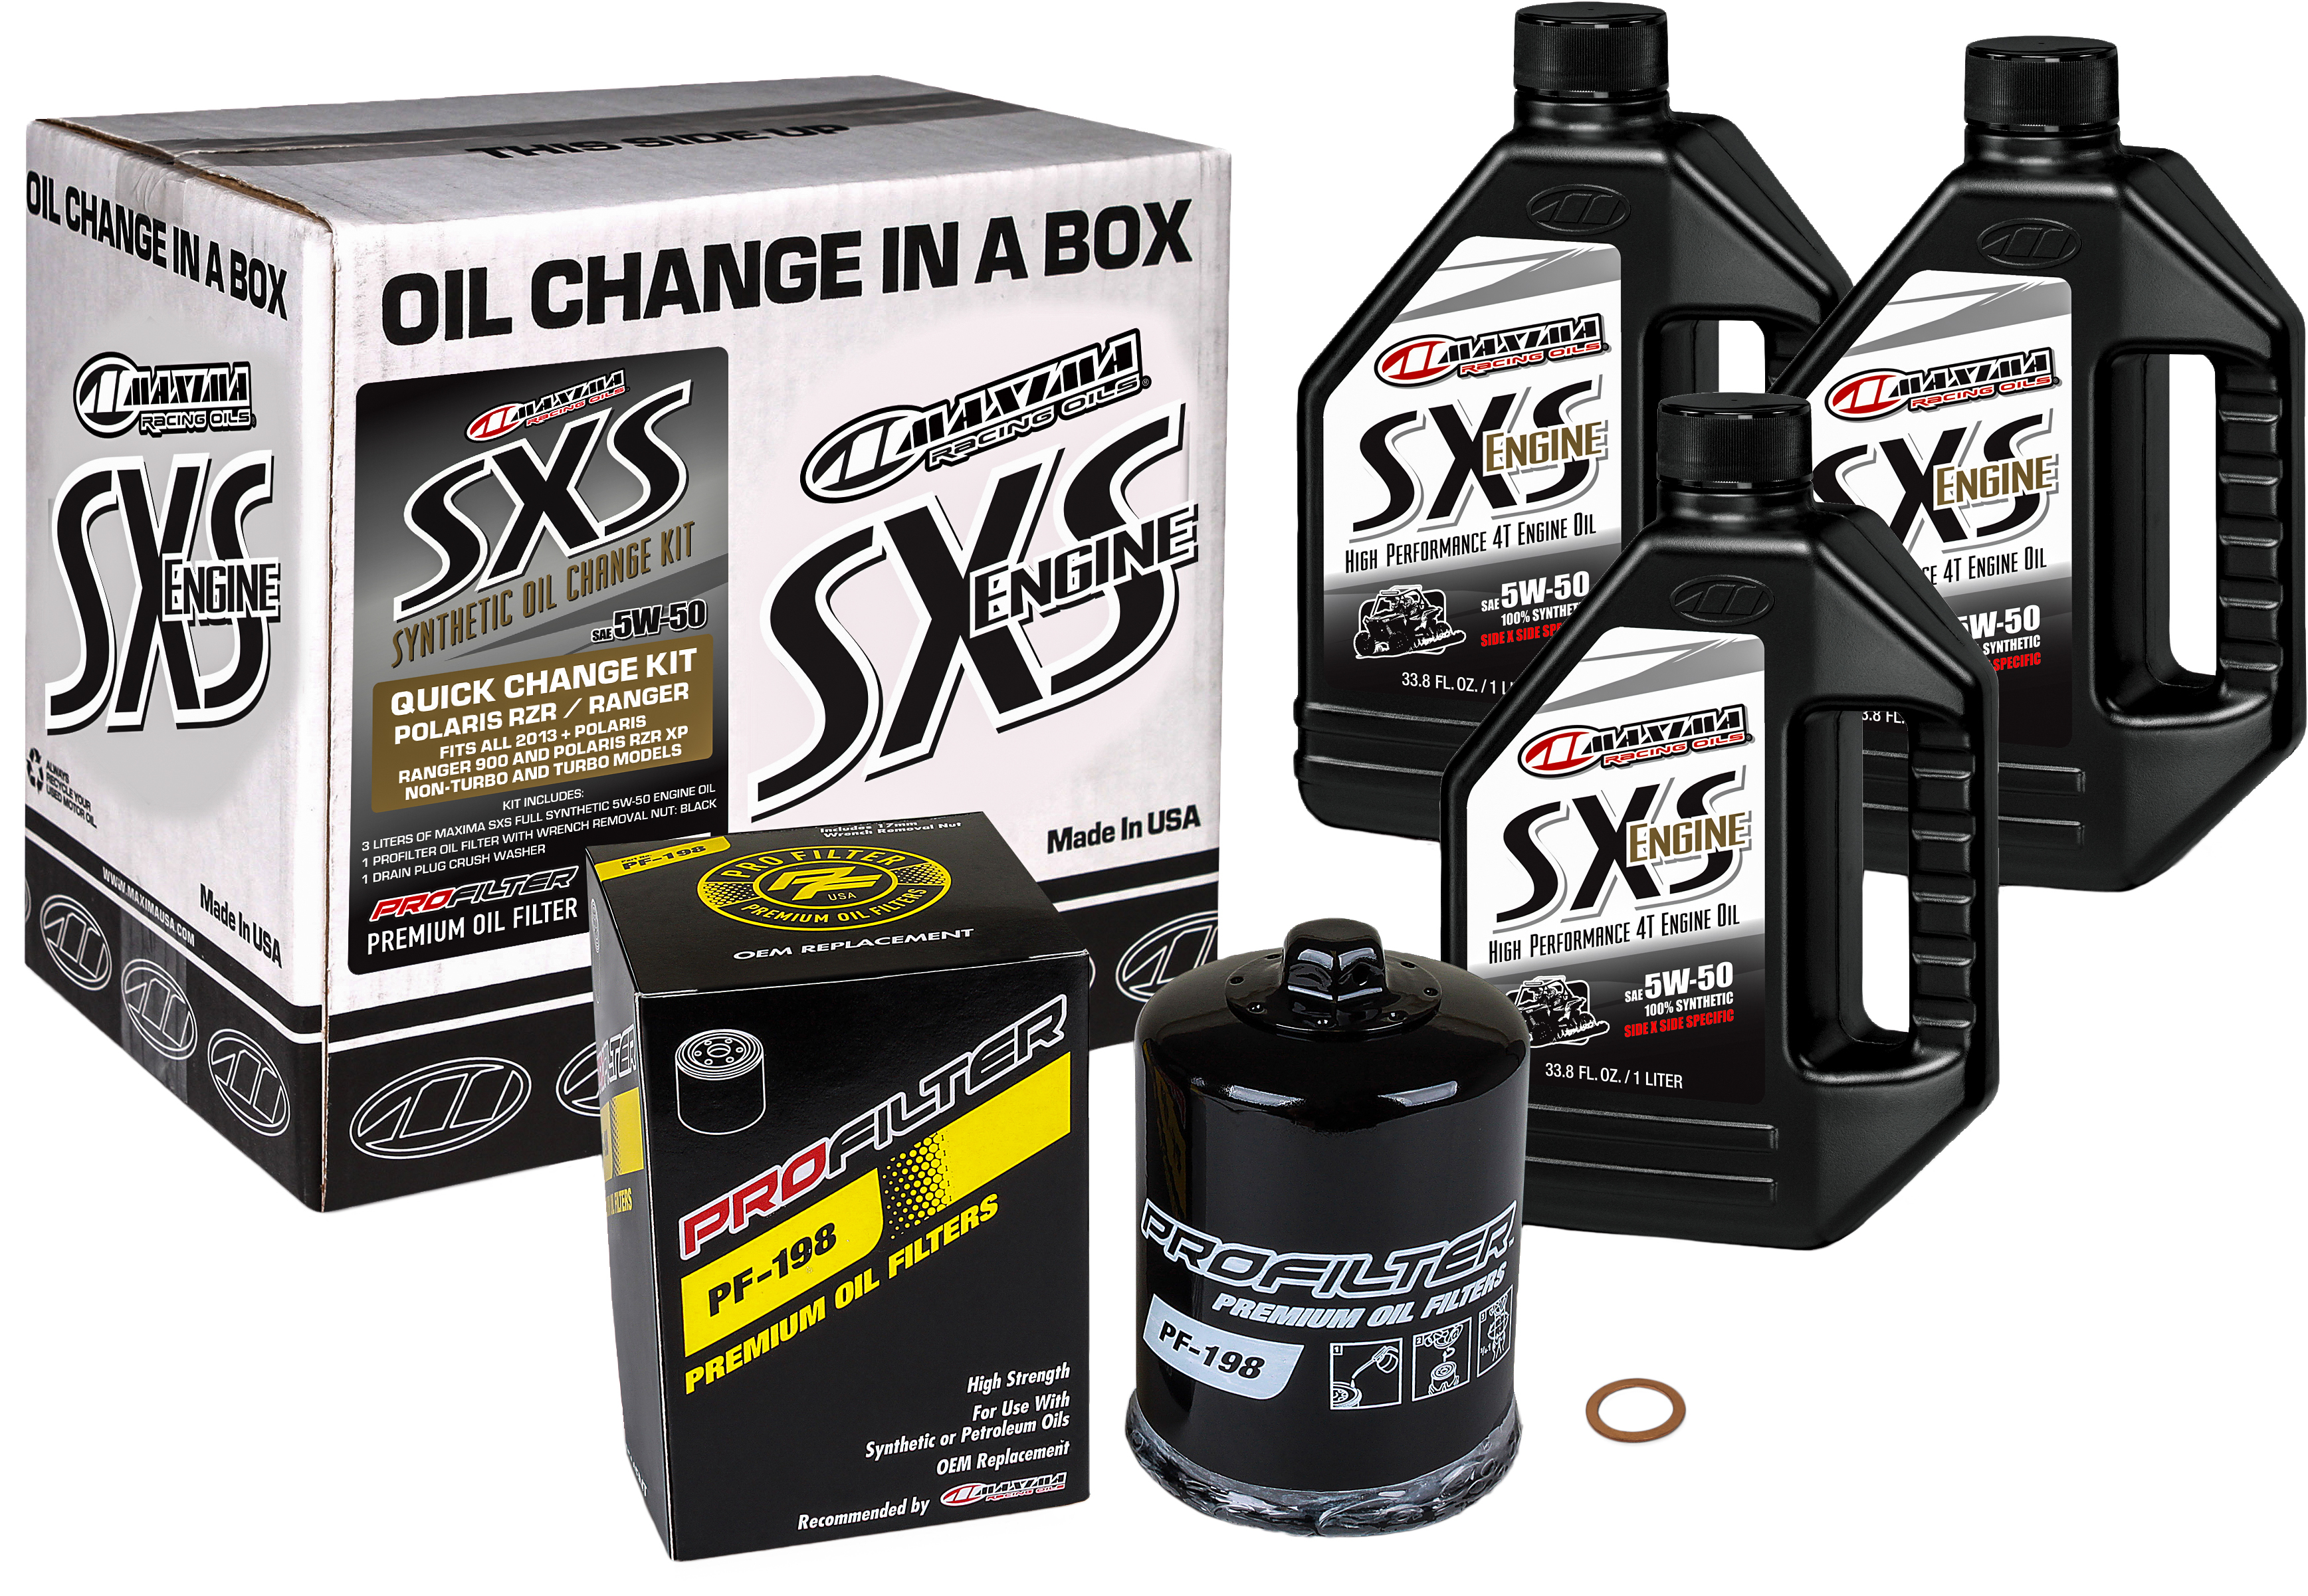 SXS Quick Oil Change Kit 5w-50 w/ Oil Filter For RZR & Ranger 900/1000 XP - 3 QTS Oil, PF-198 Filter, & Drain Plug Washer - Click Image to Close